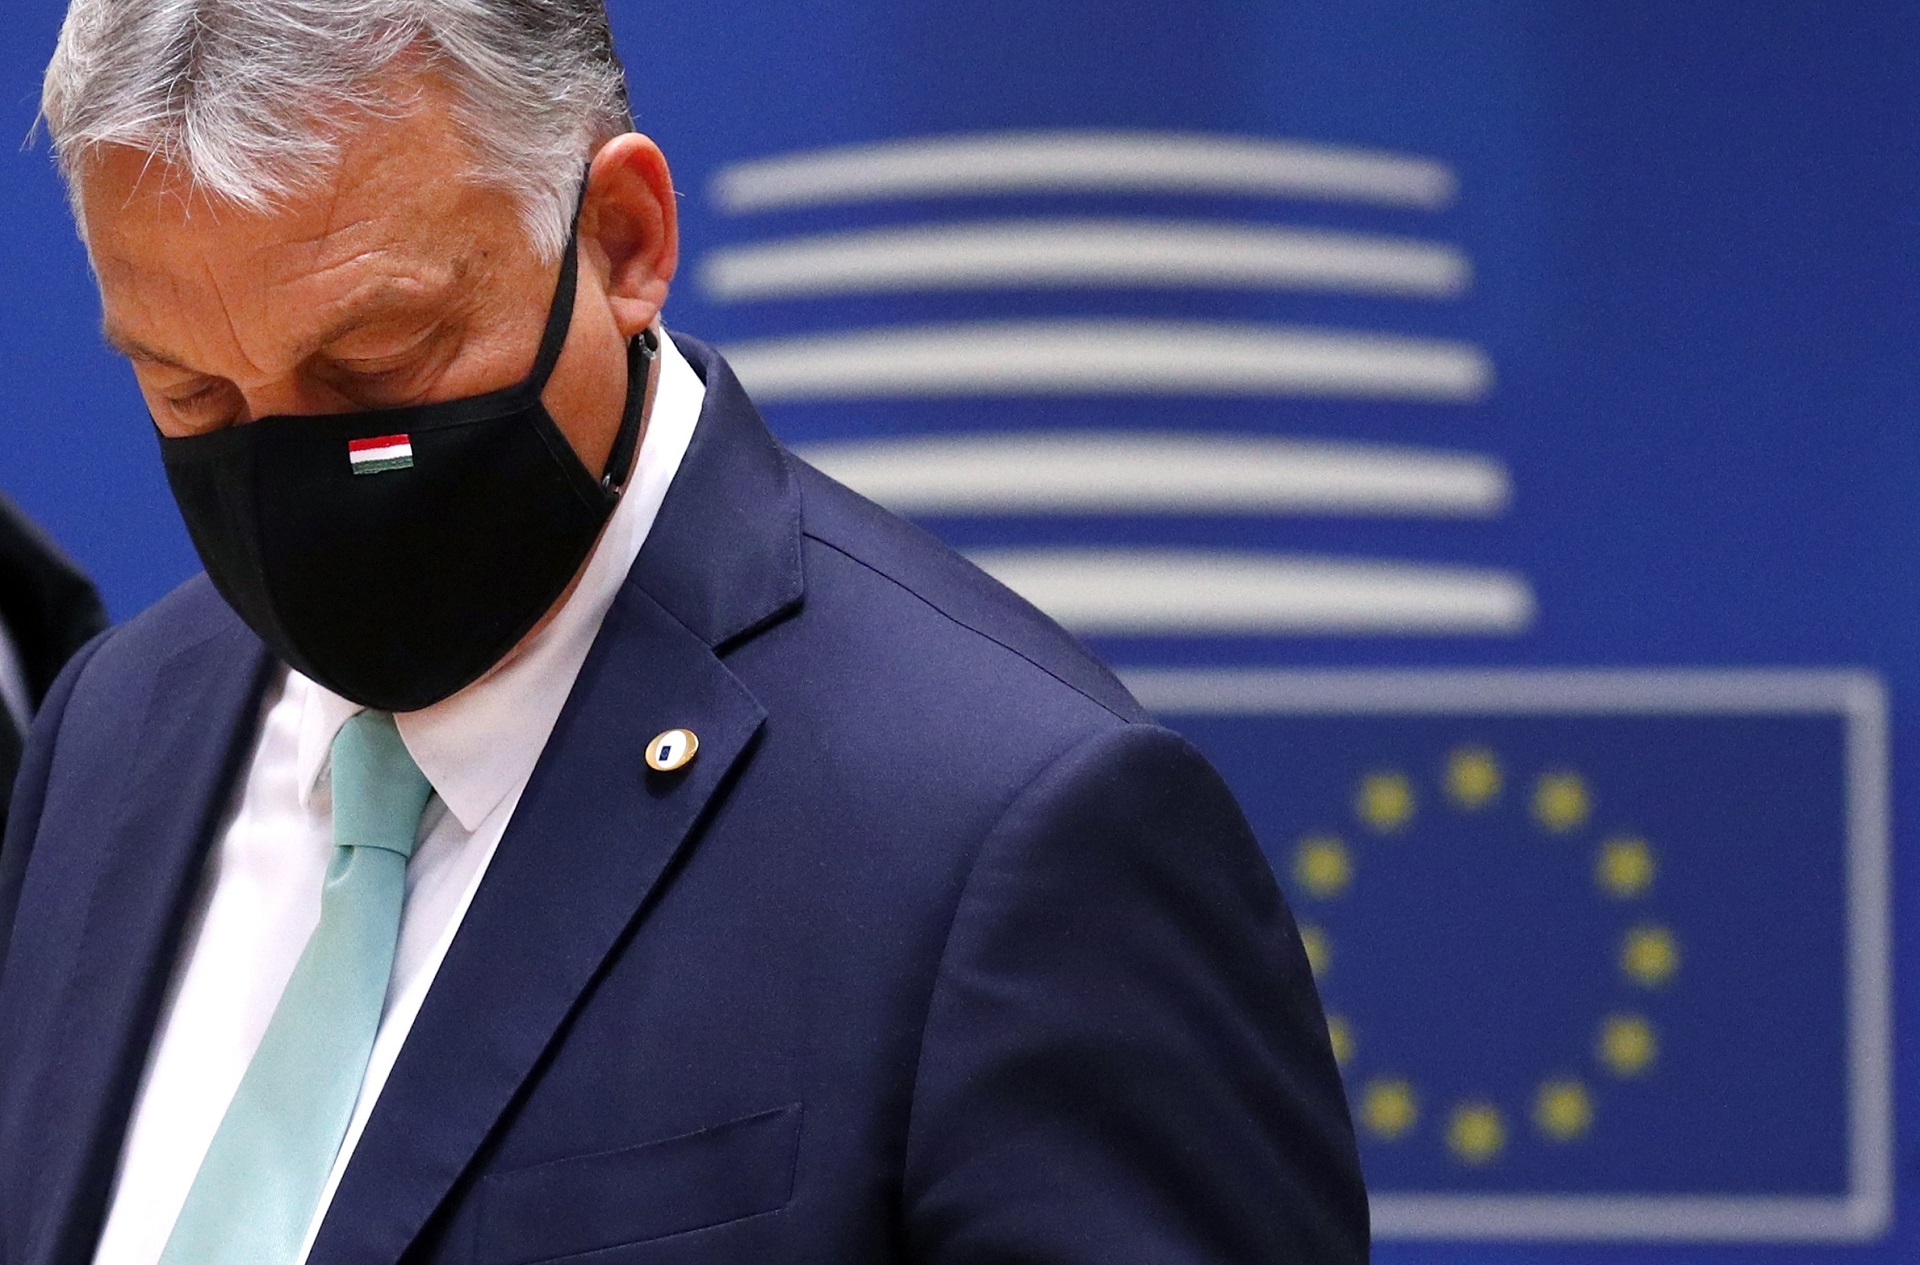 epa08553185 Hungarian Prime Minister Viktor Orban wearing a face mask at the start of the second day of an EU summit in Brussels, Belgium, 18 July 2020. European Union nations leaders meet face-to-face for the first time since February to discuss plans responding to coronavirus crisis and new long-term EU budget at the special European Council on 17 and 18 July.